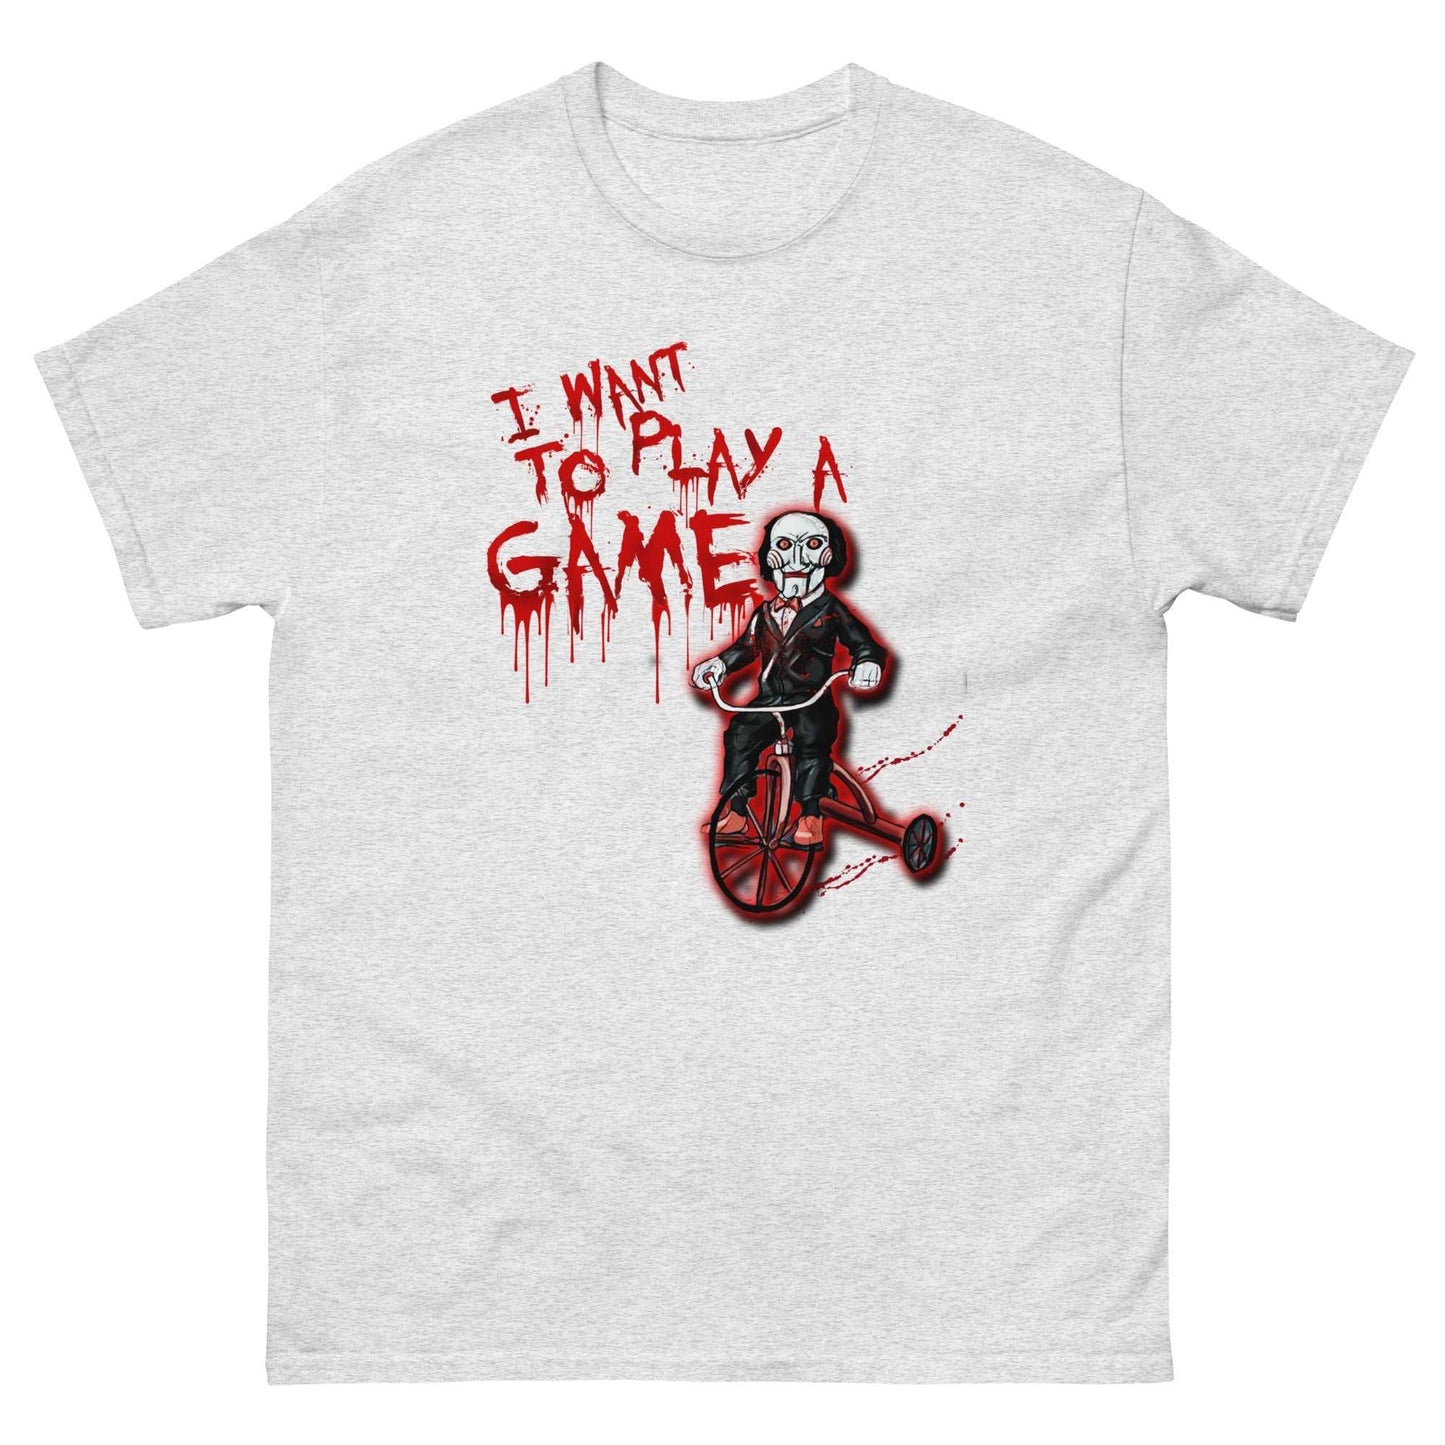 Let's Play a Game: Saw Movie 70s Tee - thenightmareinc